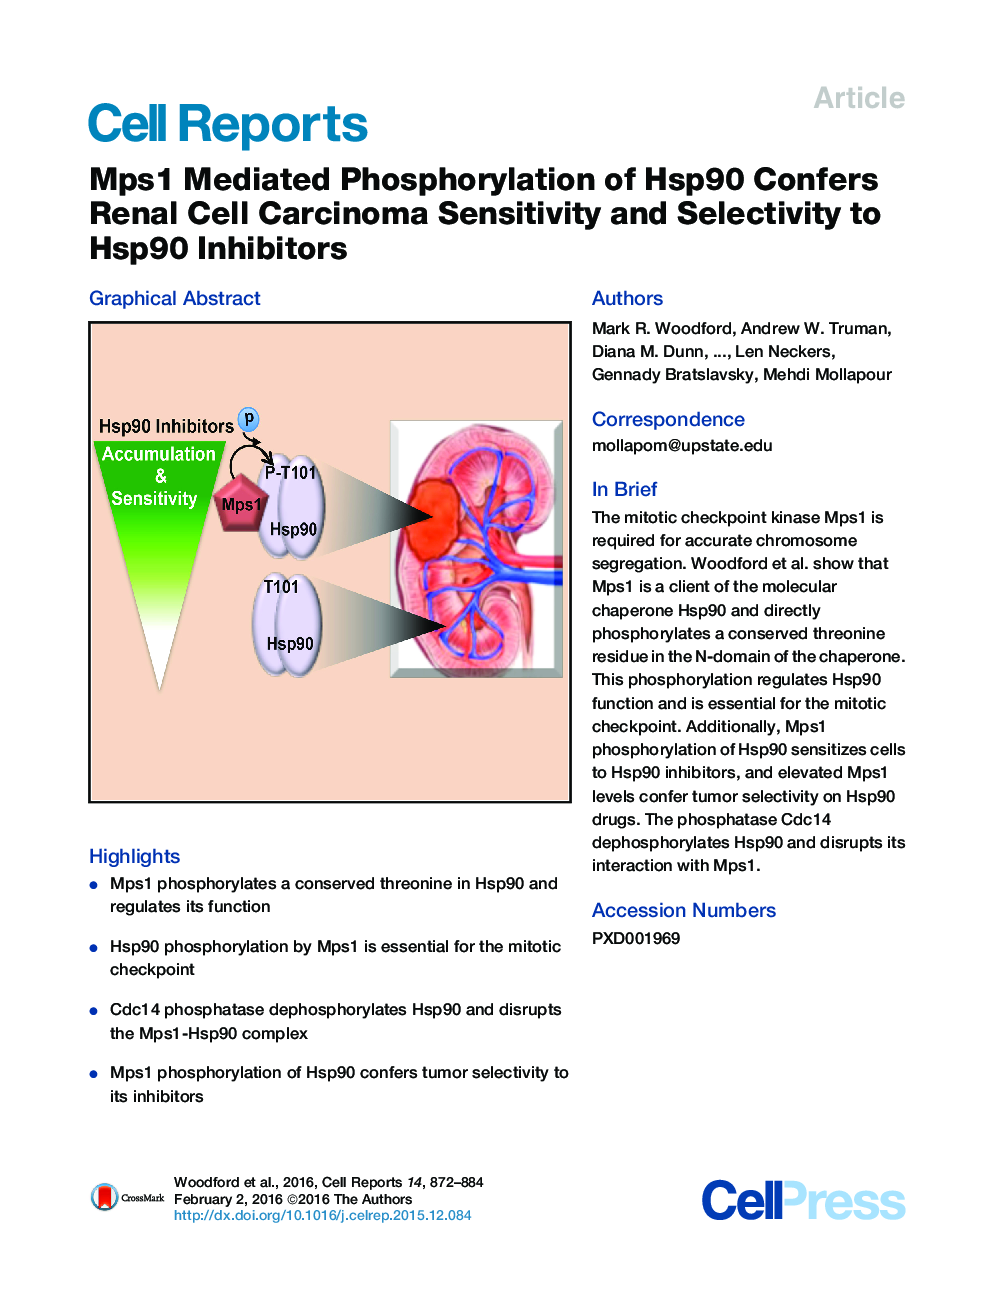 Mps1 Mediated Phosphorylation of Hsp90 Confers Renal Cell Carcinoma Sensitivity and Selectivity to Hsp90 Inhibitors 